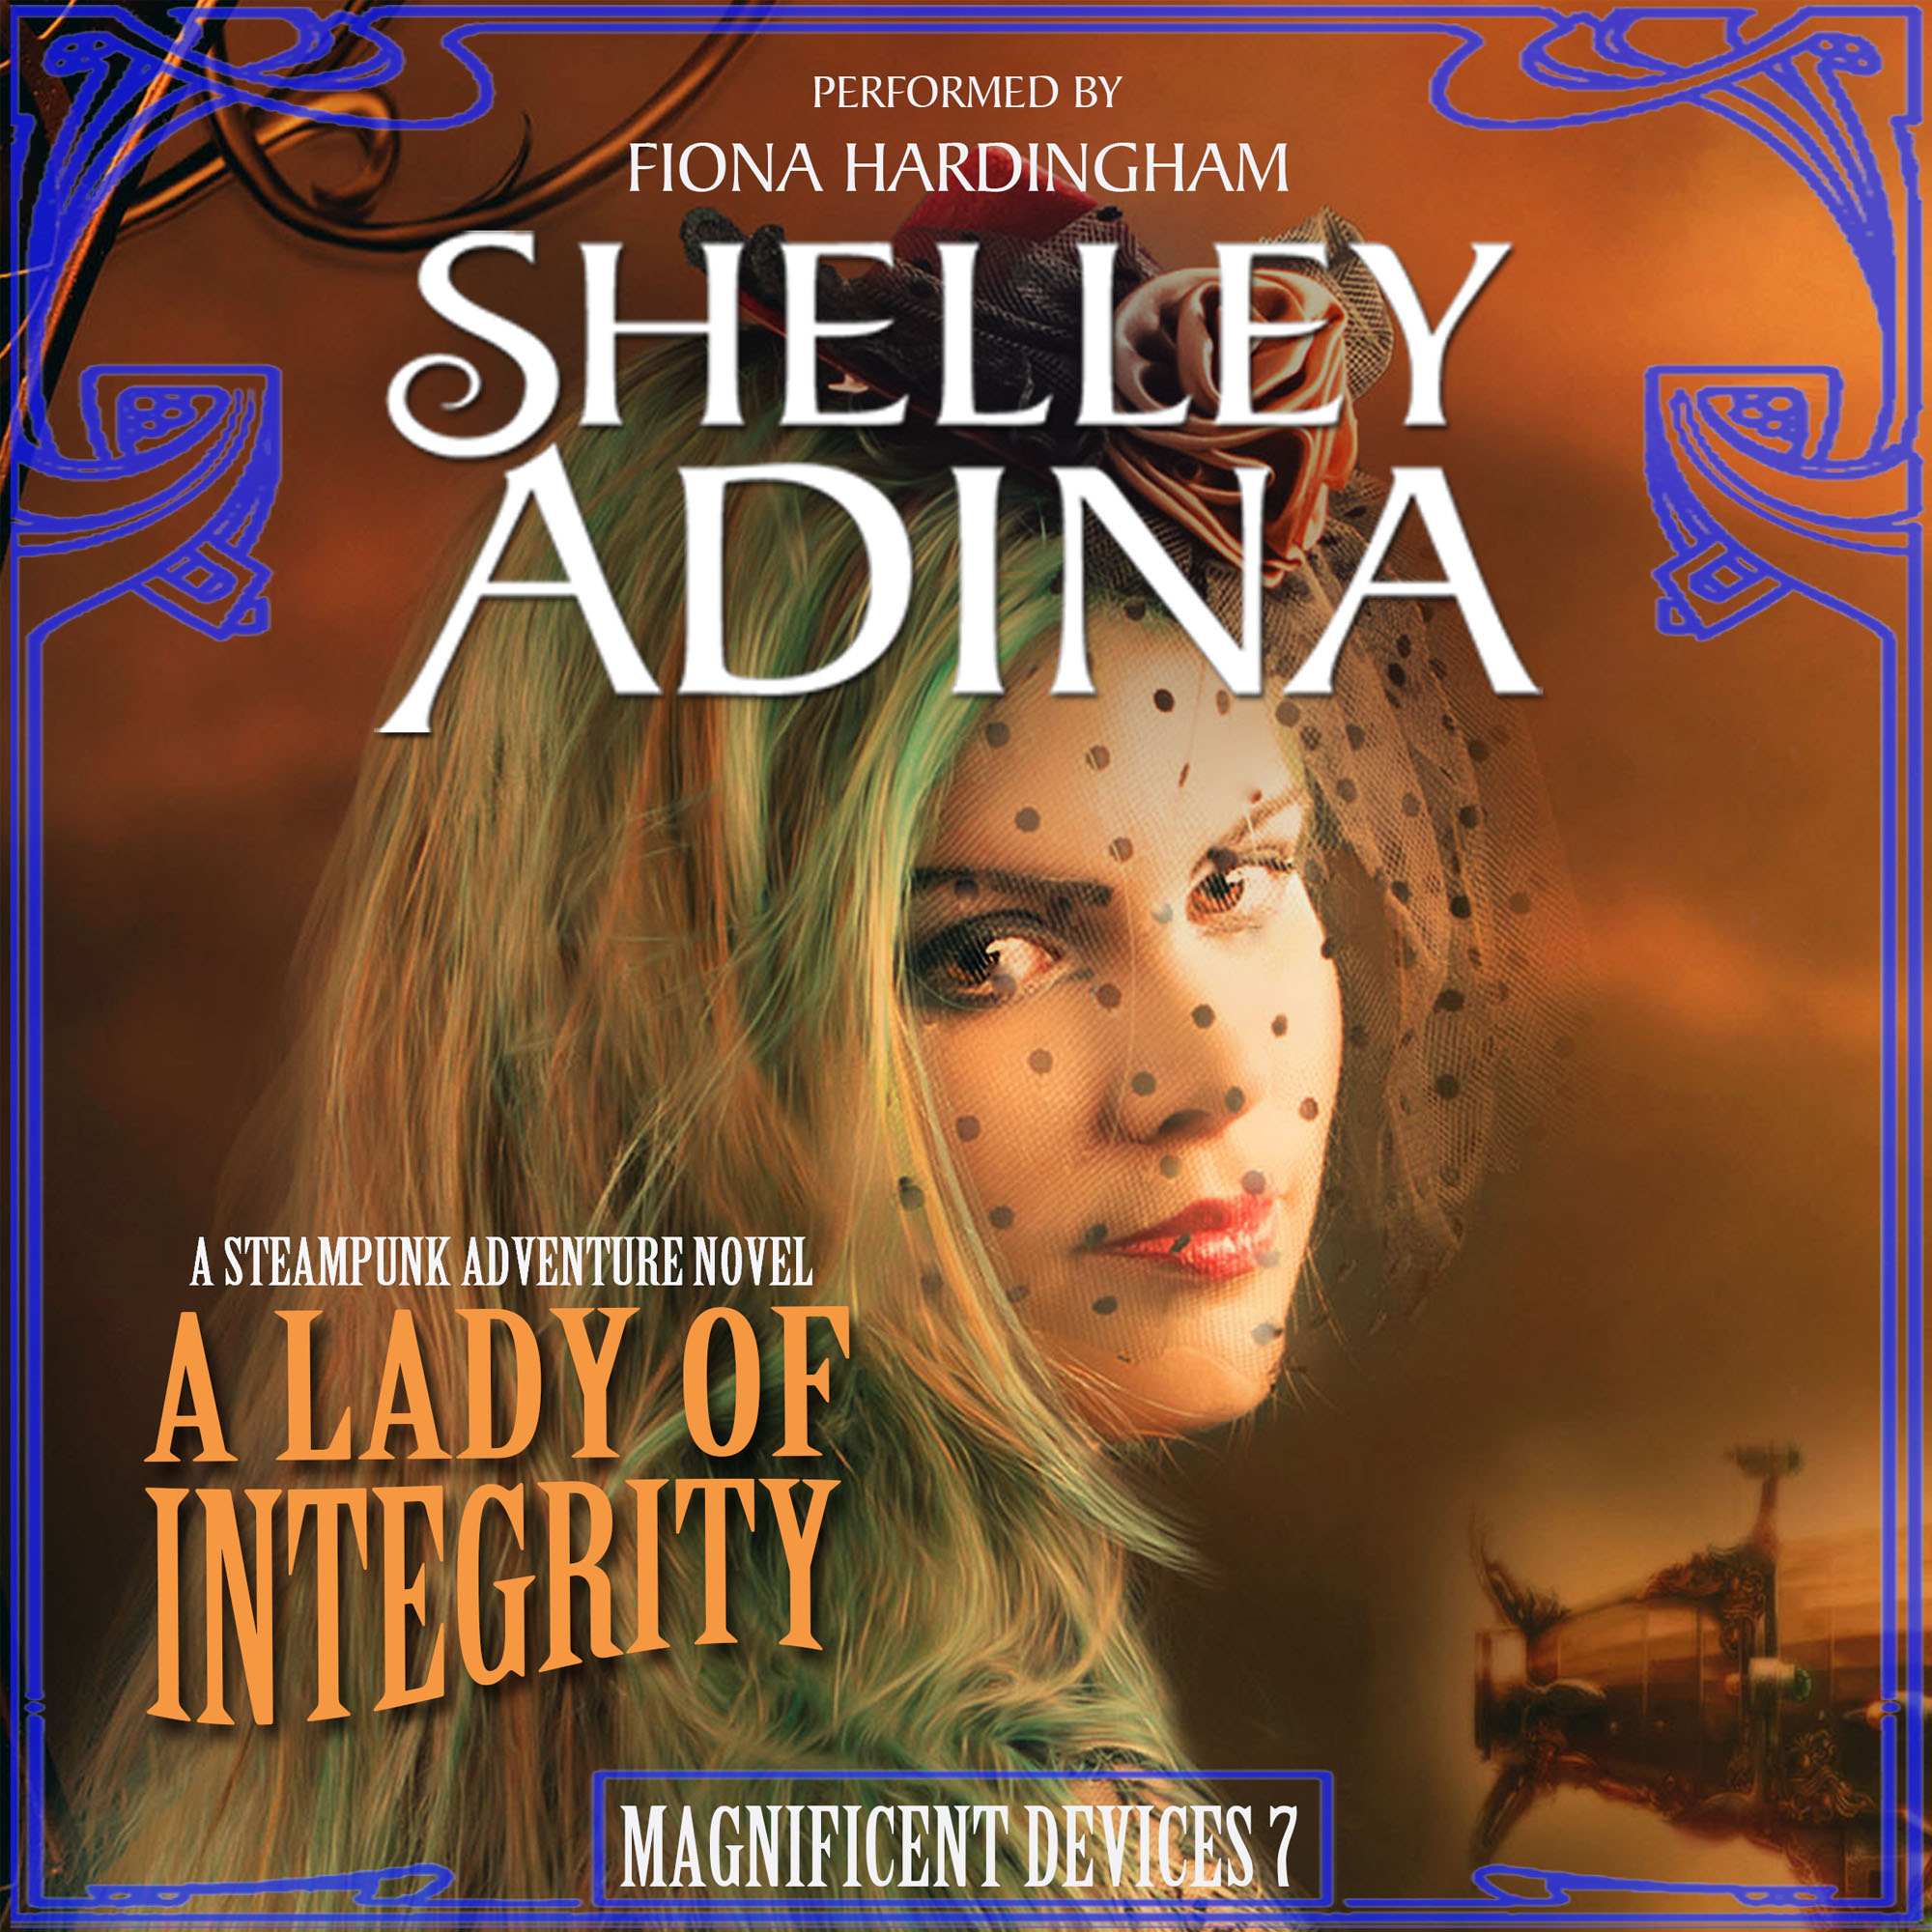 A Lady of Integrity audiobook by Shelley Adina, narrated by Fiona Hardingham